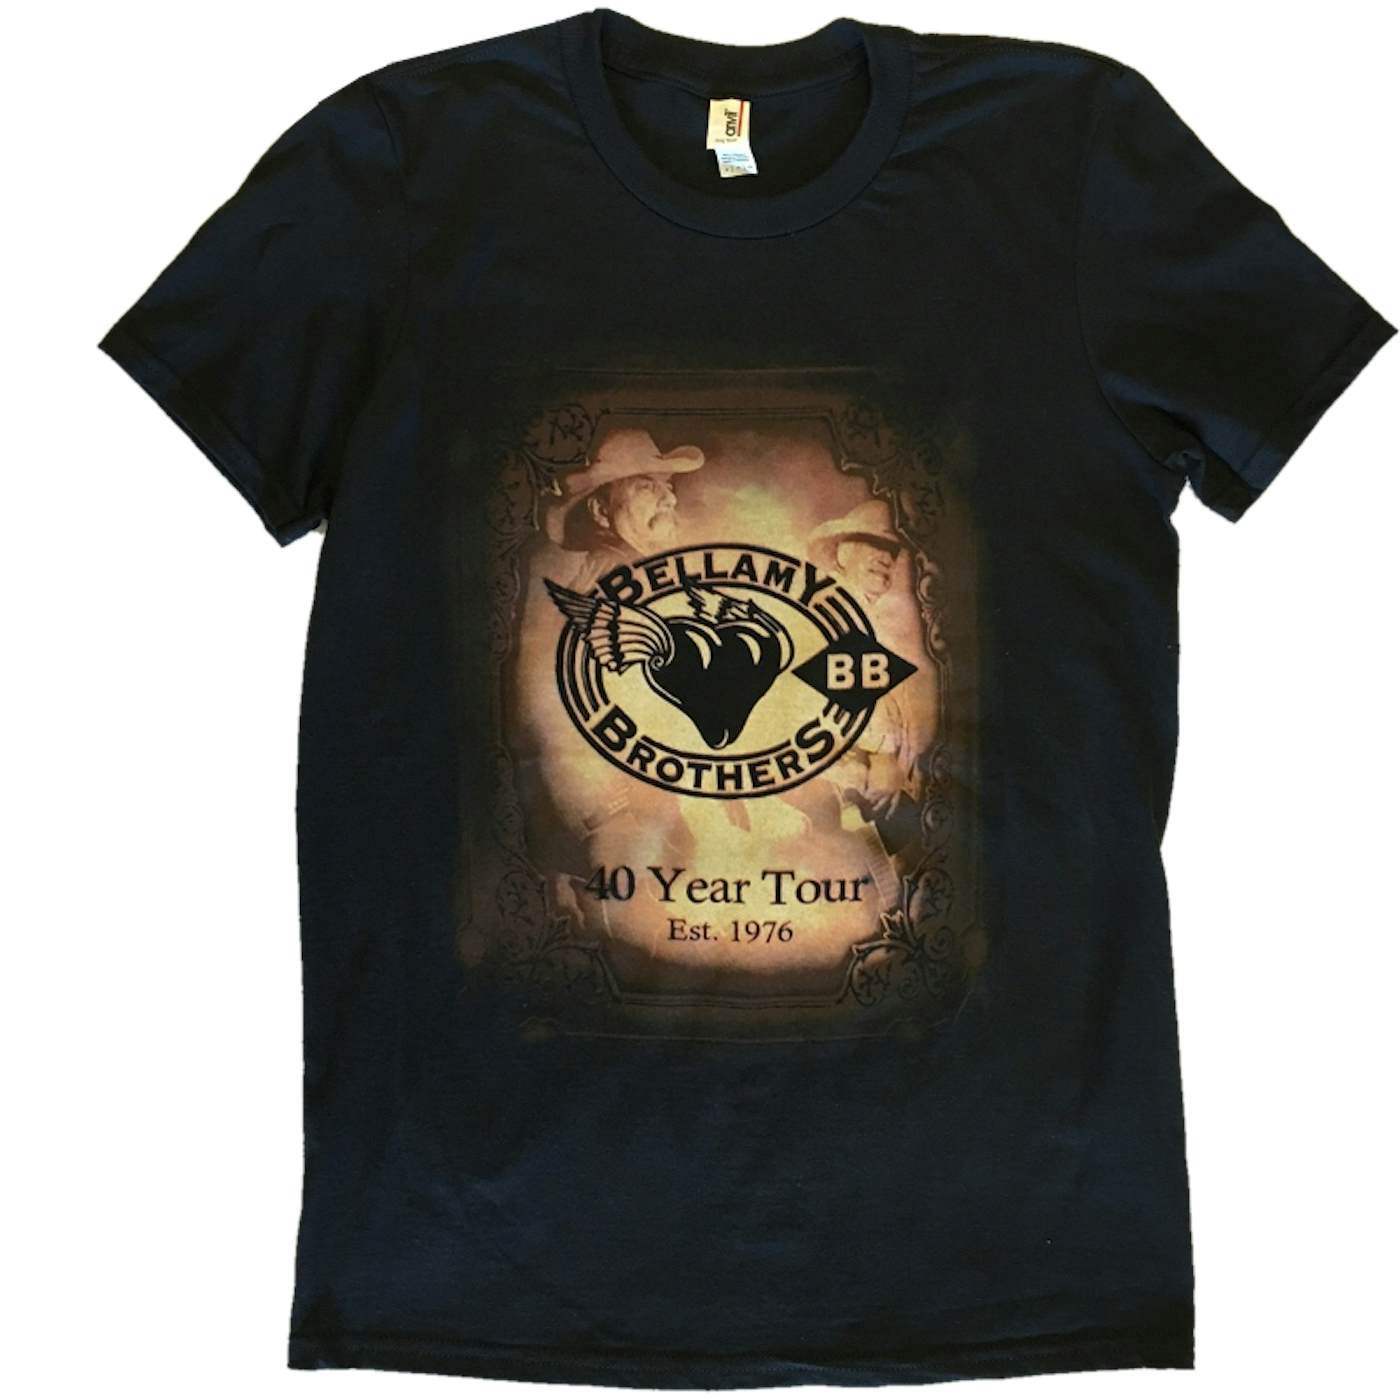 The Bellamy Brothers 40 Year Tour Black Tee